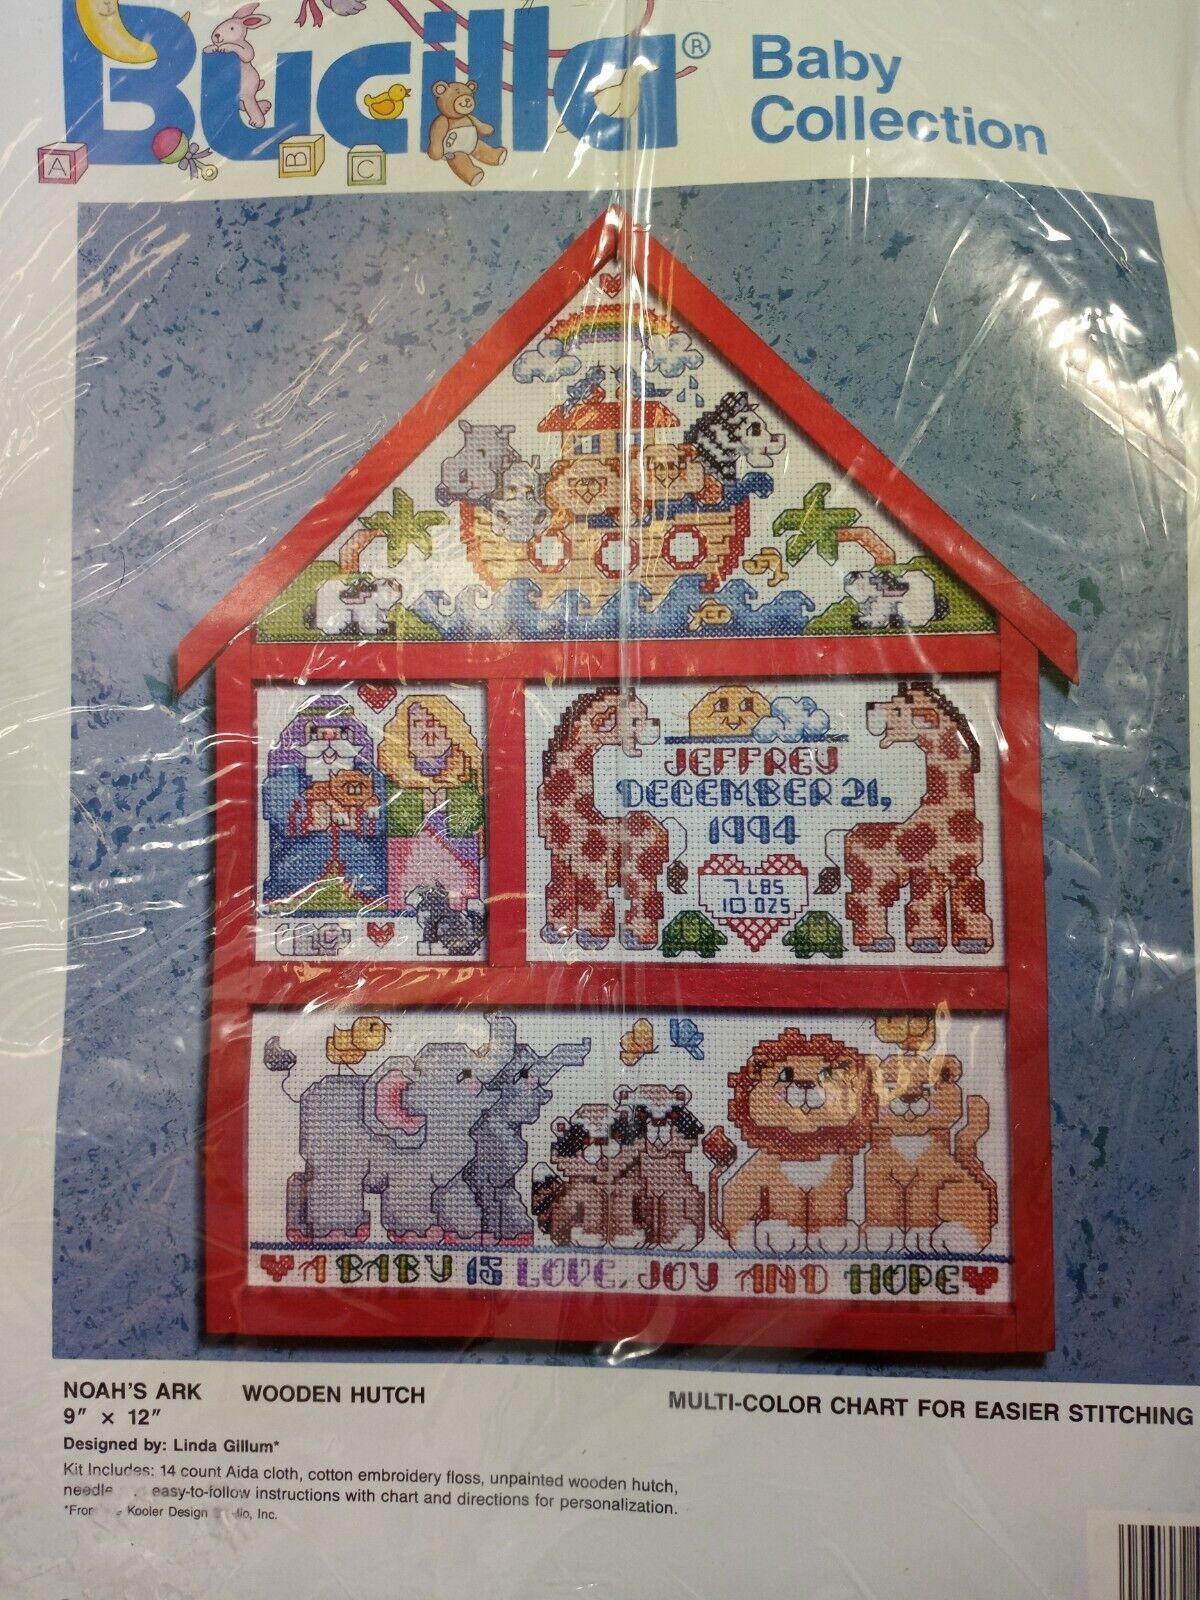 Vintage 1994 Bucilla Baby Collection Noah's Ark Embroidery Kit. - $13.99